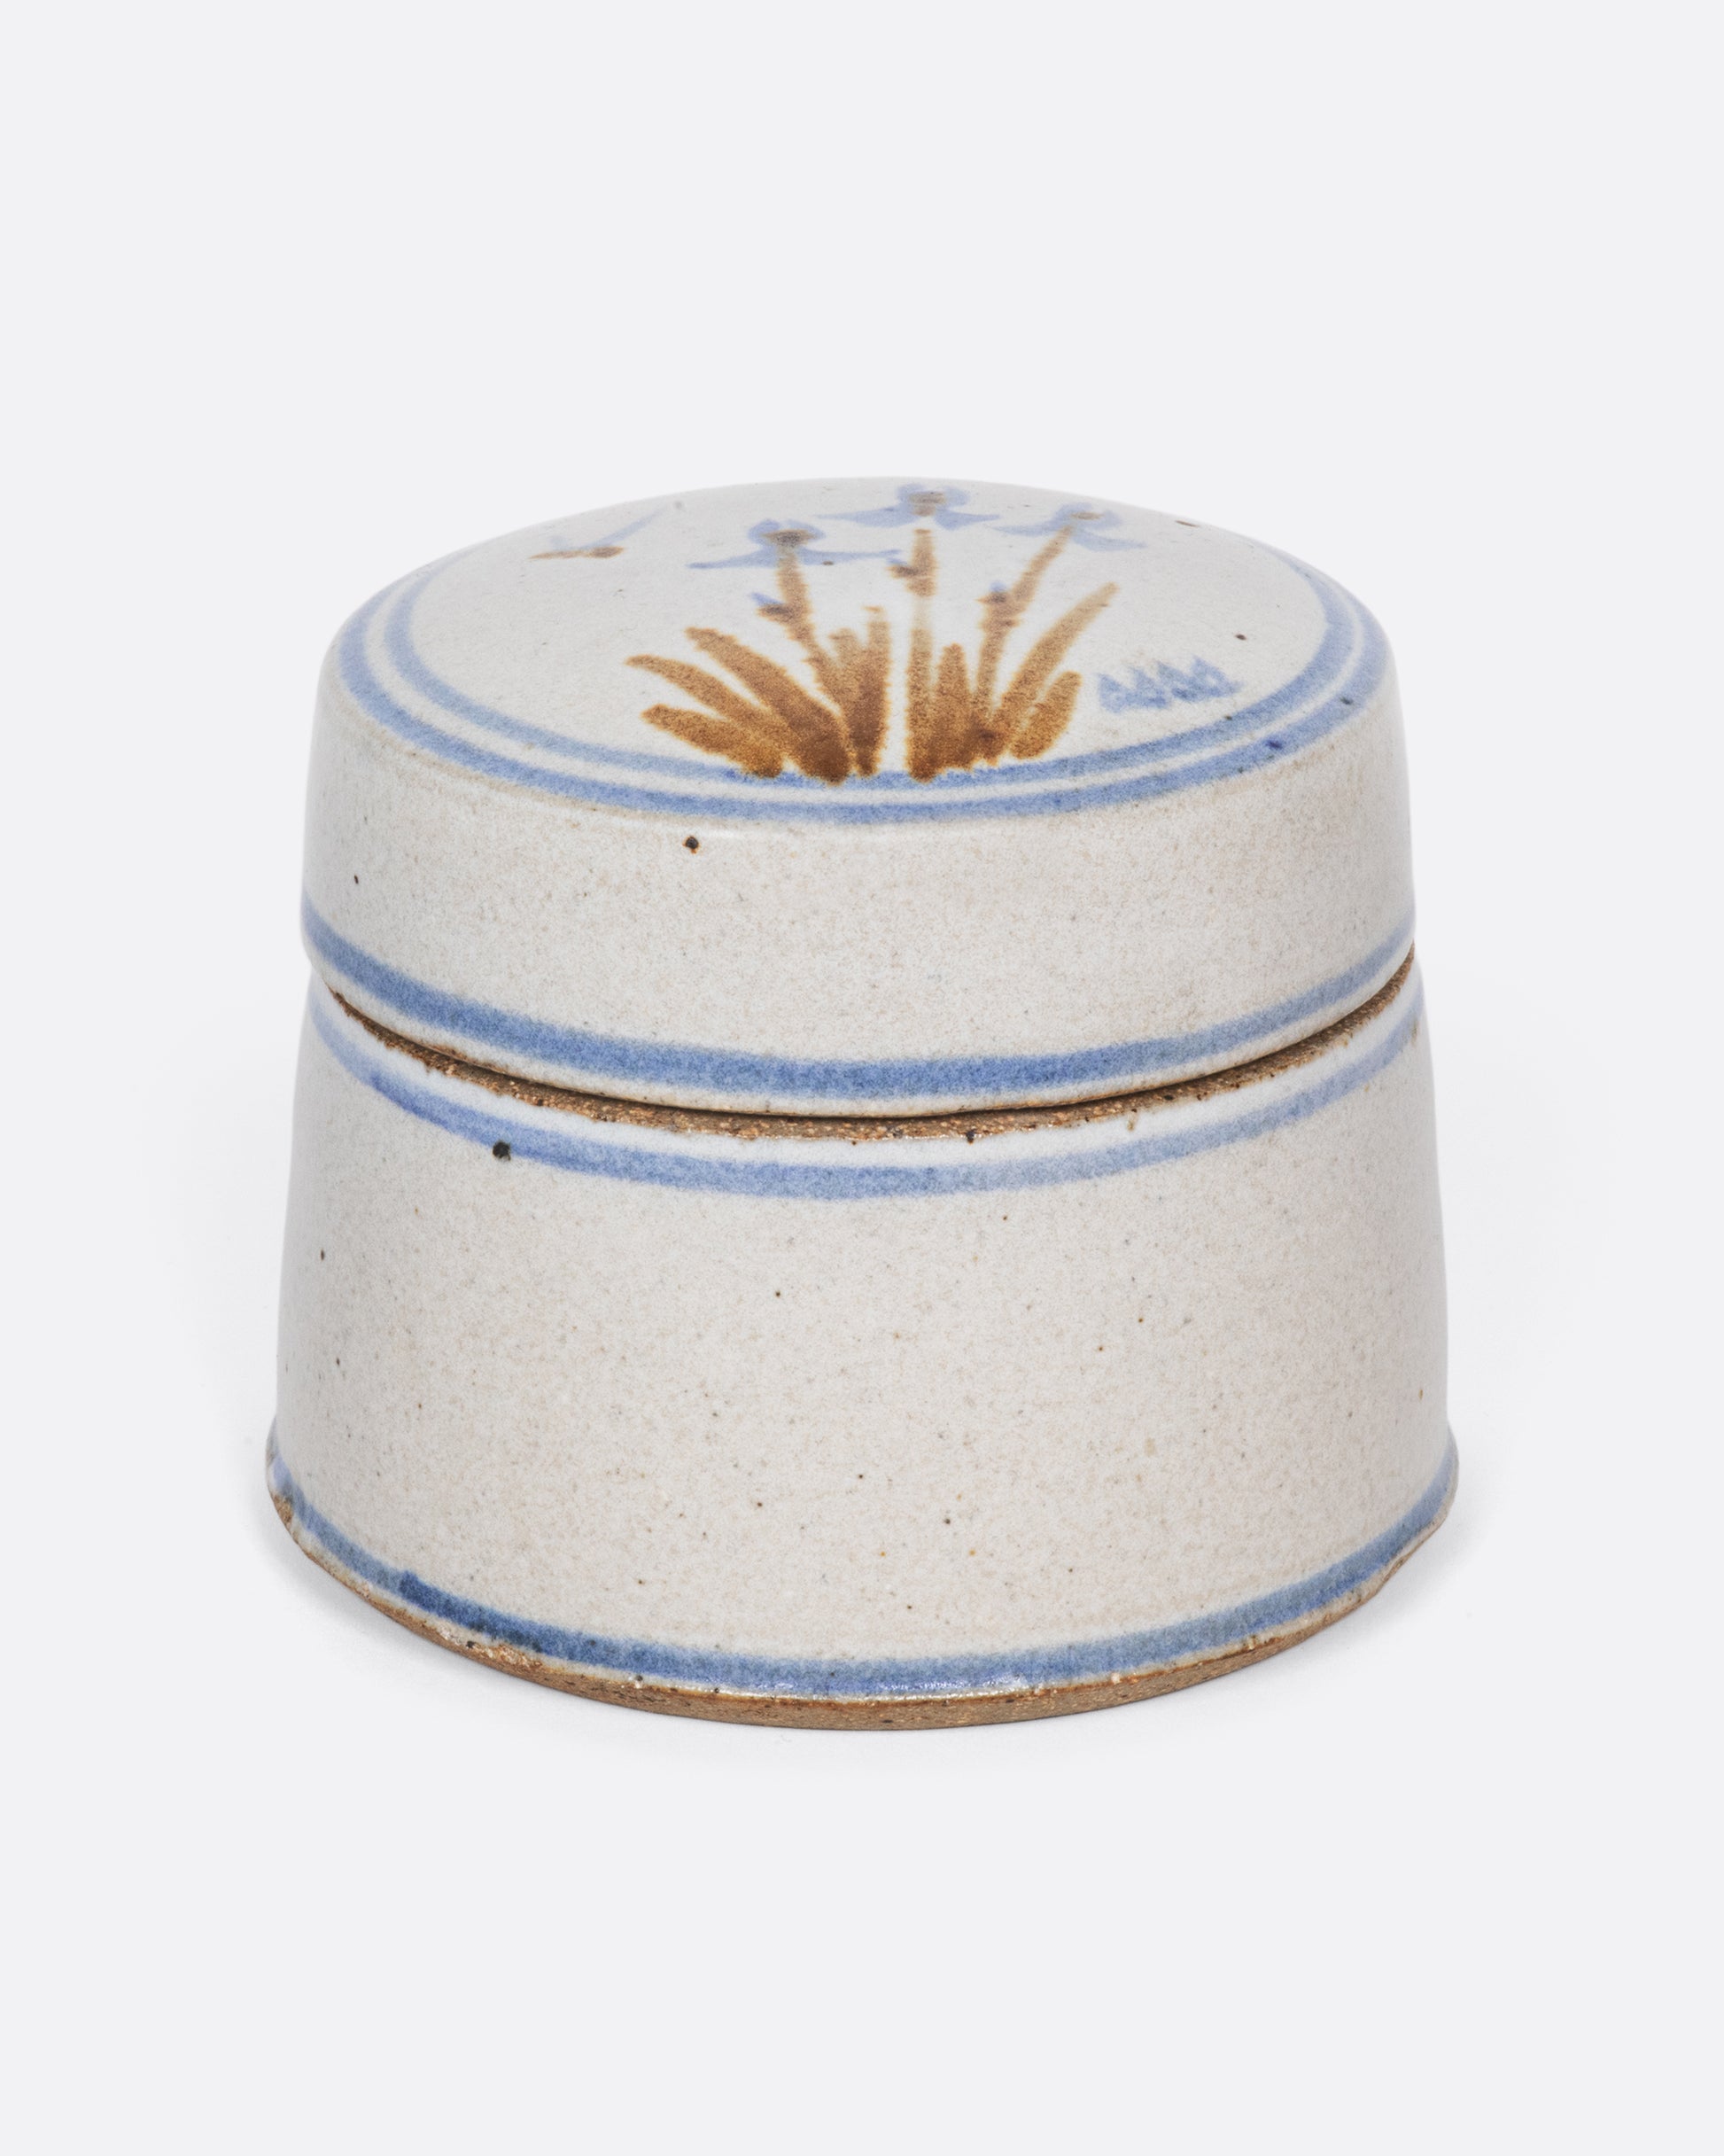 A sweet ceramic round box with blue irises hand painted on the lid.